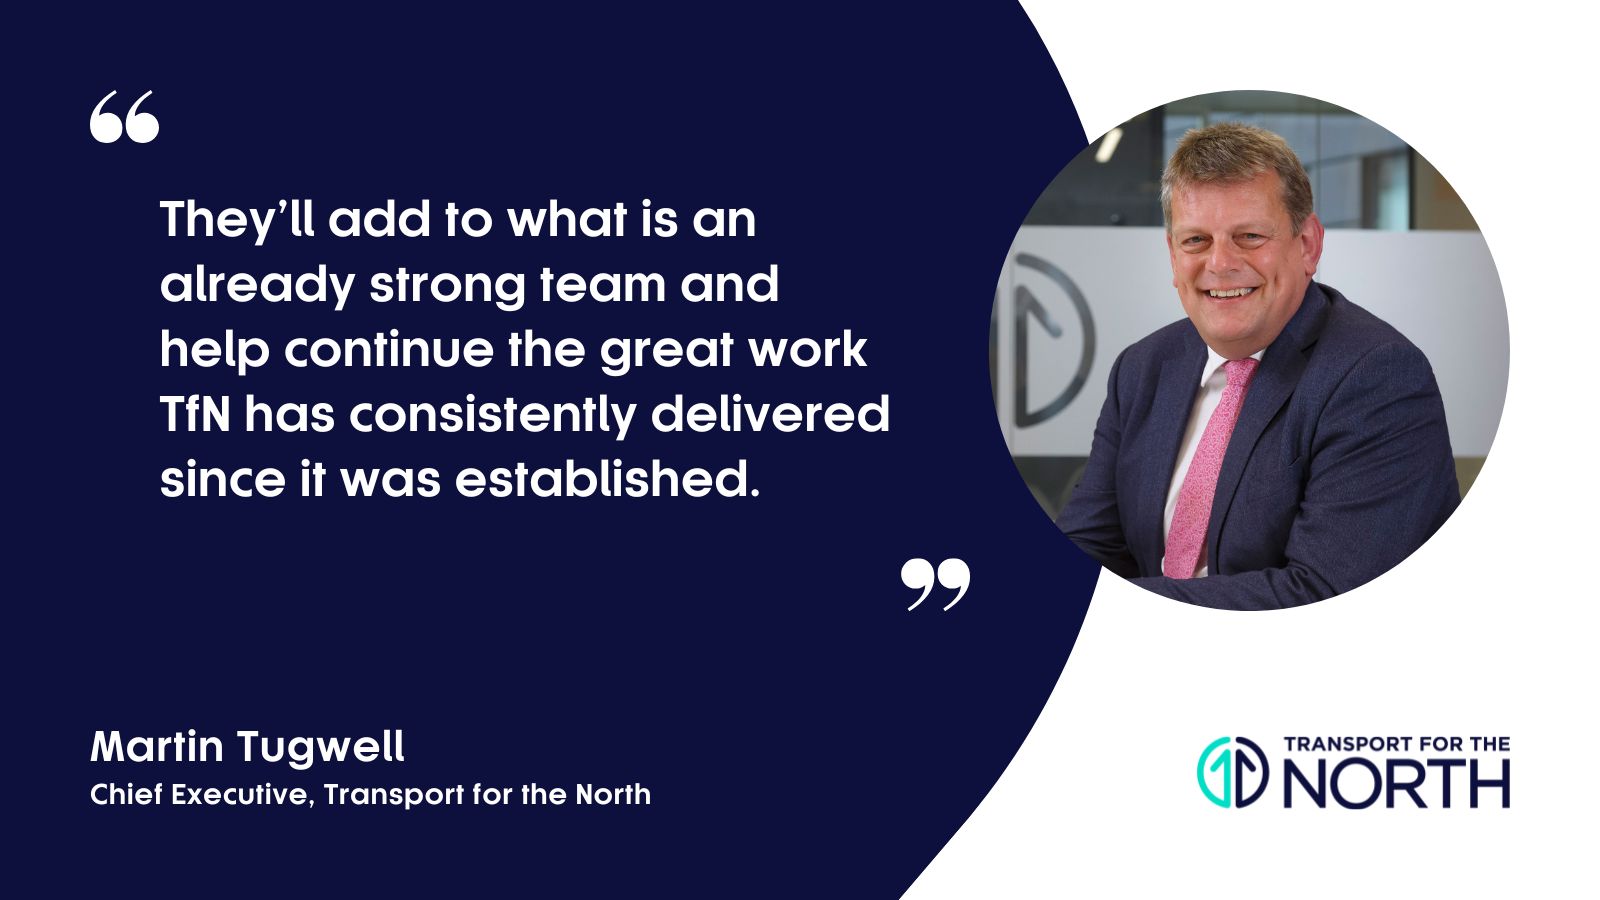 Martin Tugwell, CEO of Transport for the North on the new directors joining the organisation